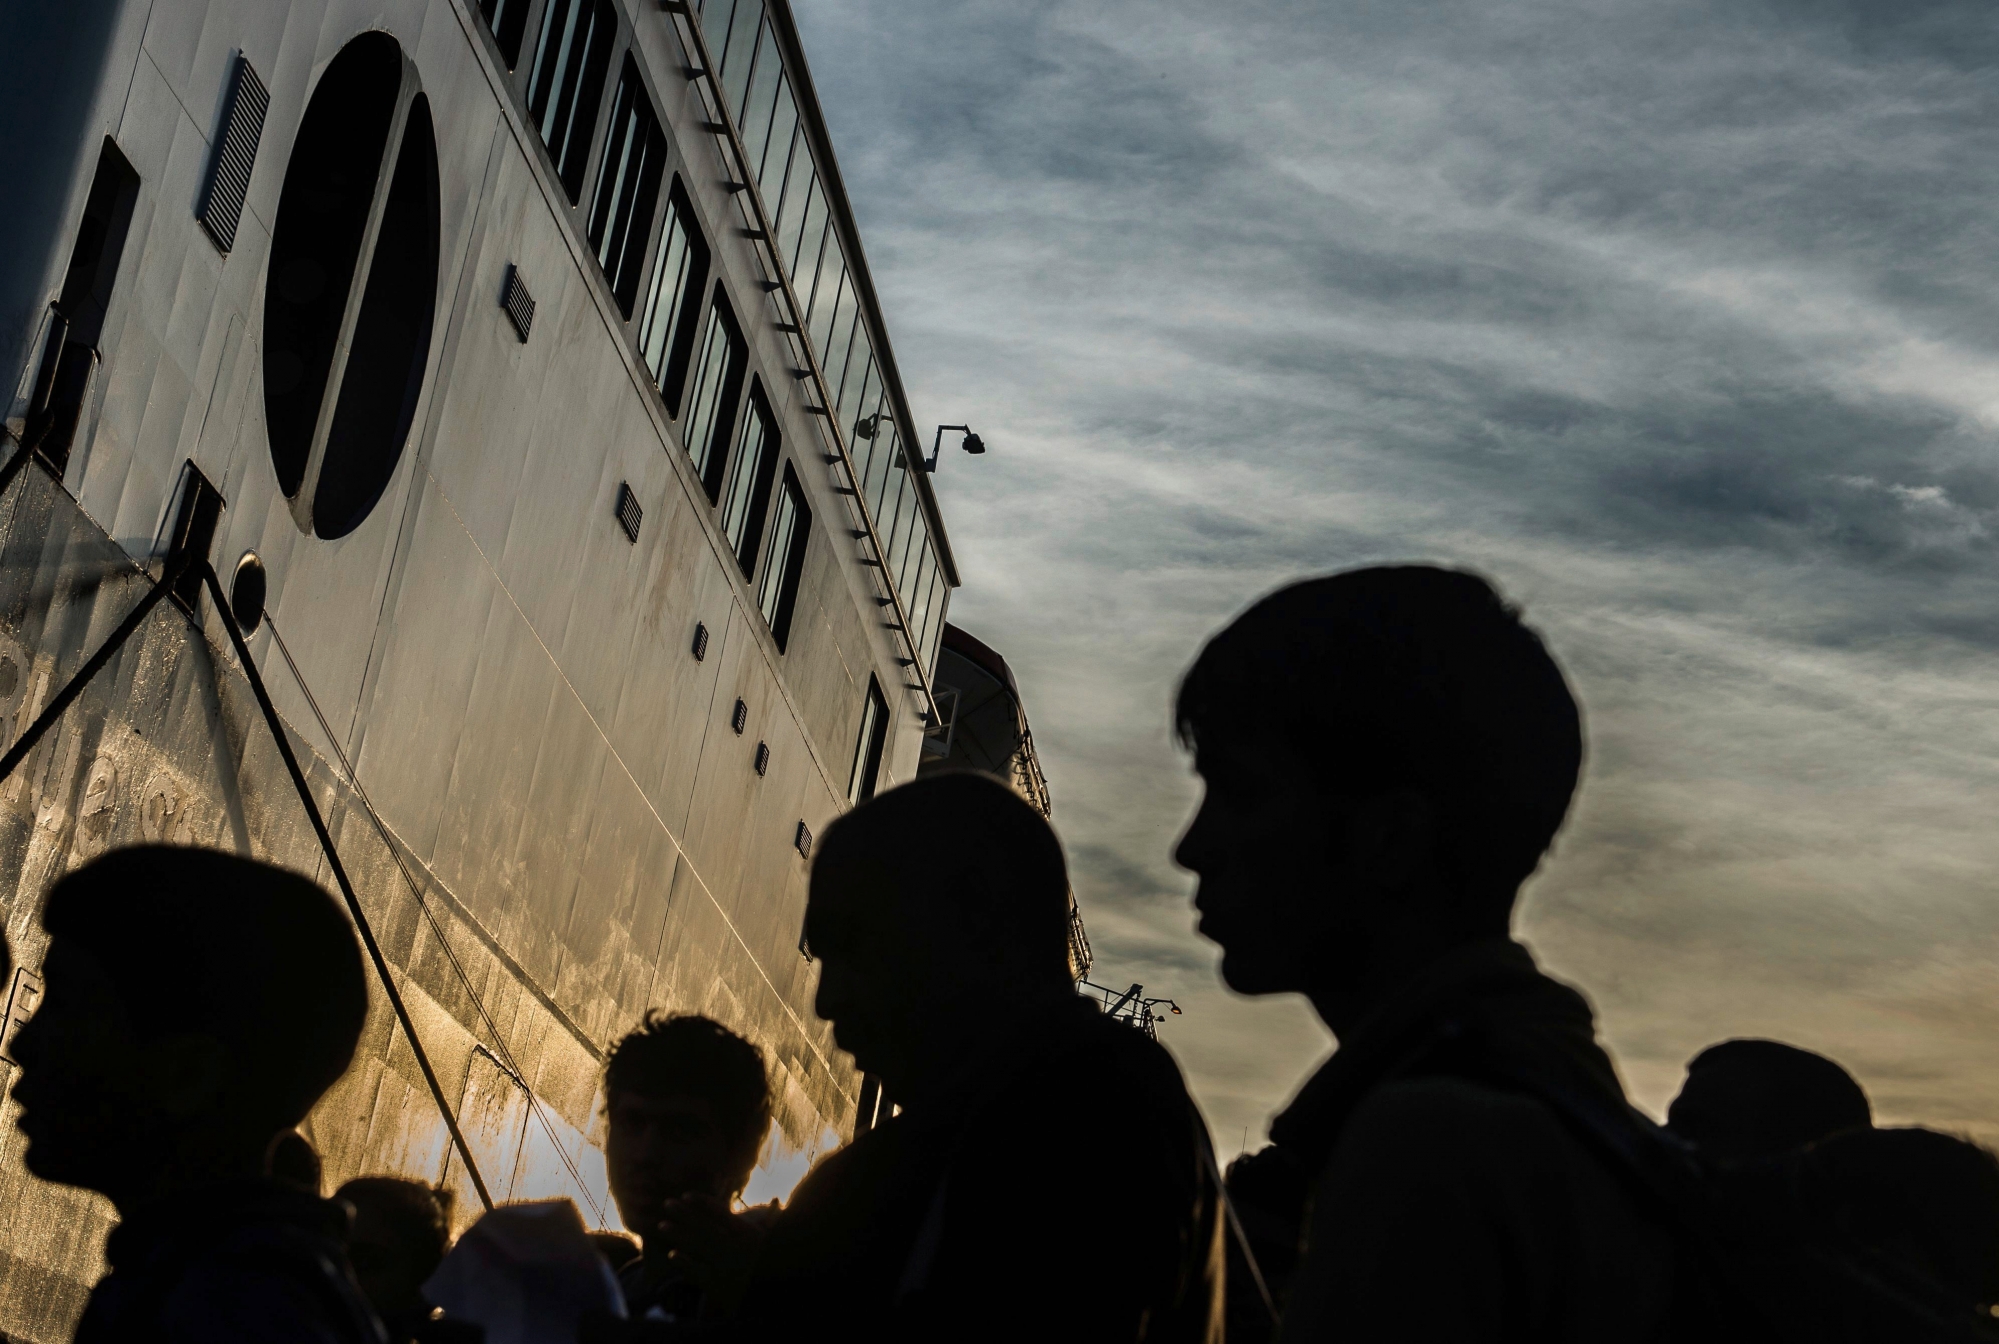 epa04964937 Refugees and migrants line up to board a ferry at the port in Mytilini, Lesbos island, Greece, 05 October 2015. The ferry will be carrying more two thausands refugees and migrants that had landed on the Greek island of Lesvos in past days, crossing from Turkey. An estimated 100,000 refugees and migrants arrived on the Greek islands during August, according to the Hellenic Coast Guard.  EPA/FILIP SINGER GREECE MIGRATION REFUGEES CRISIS